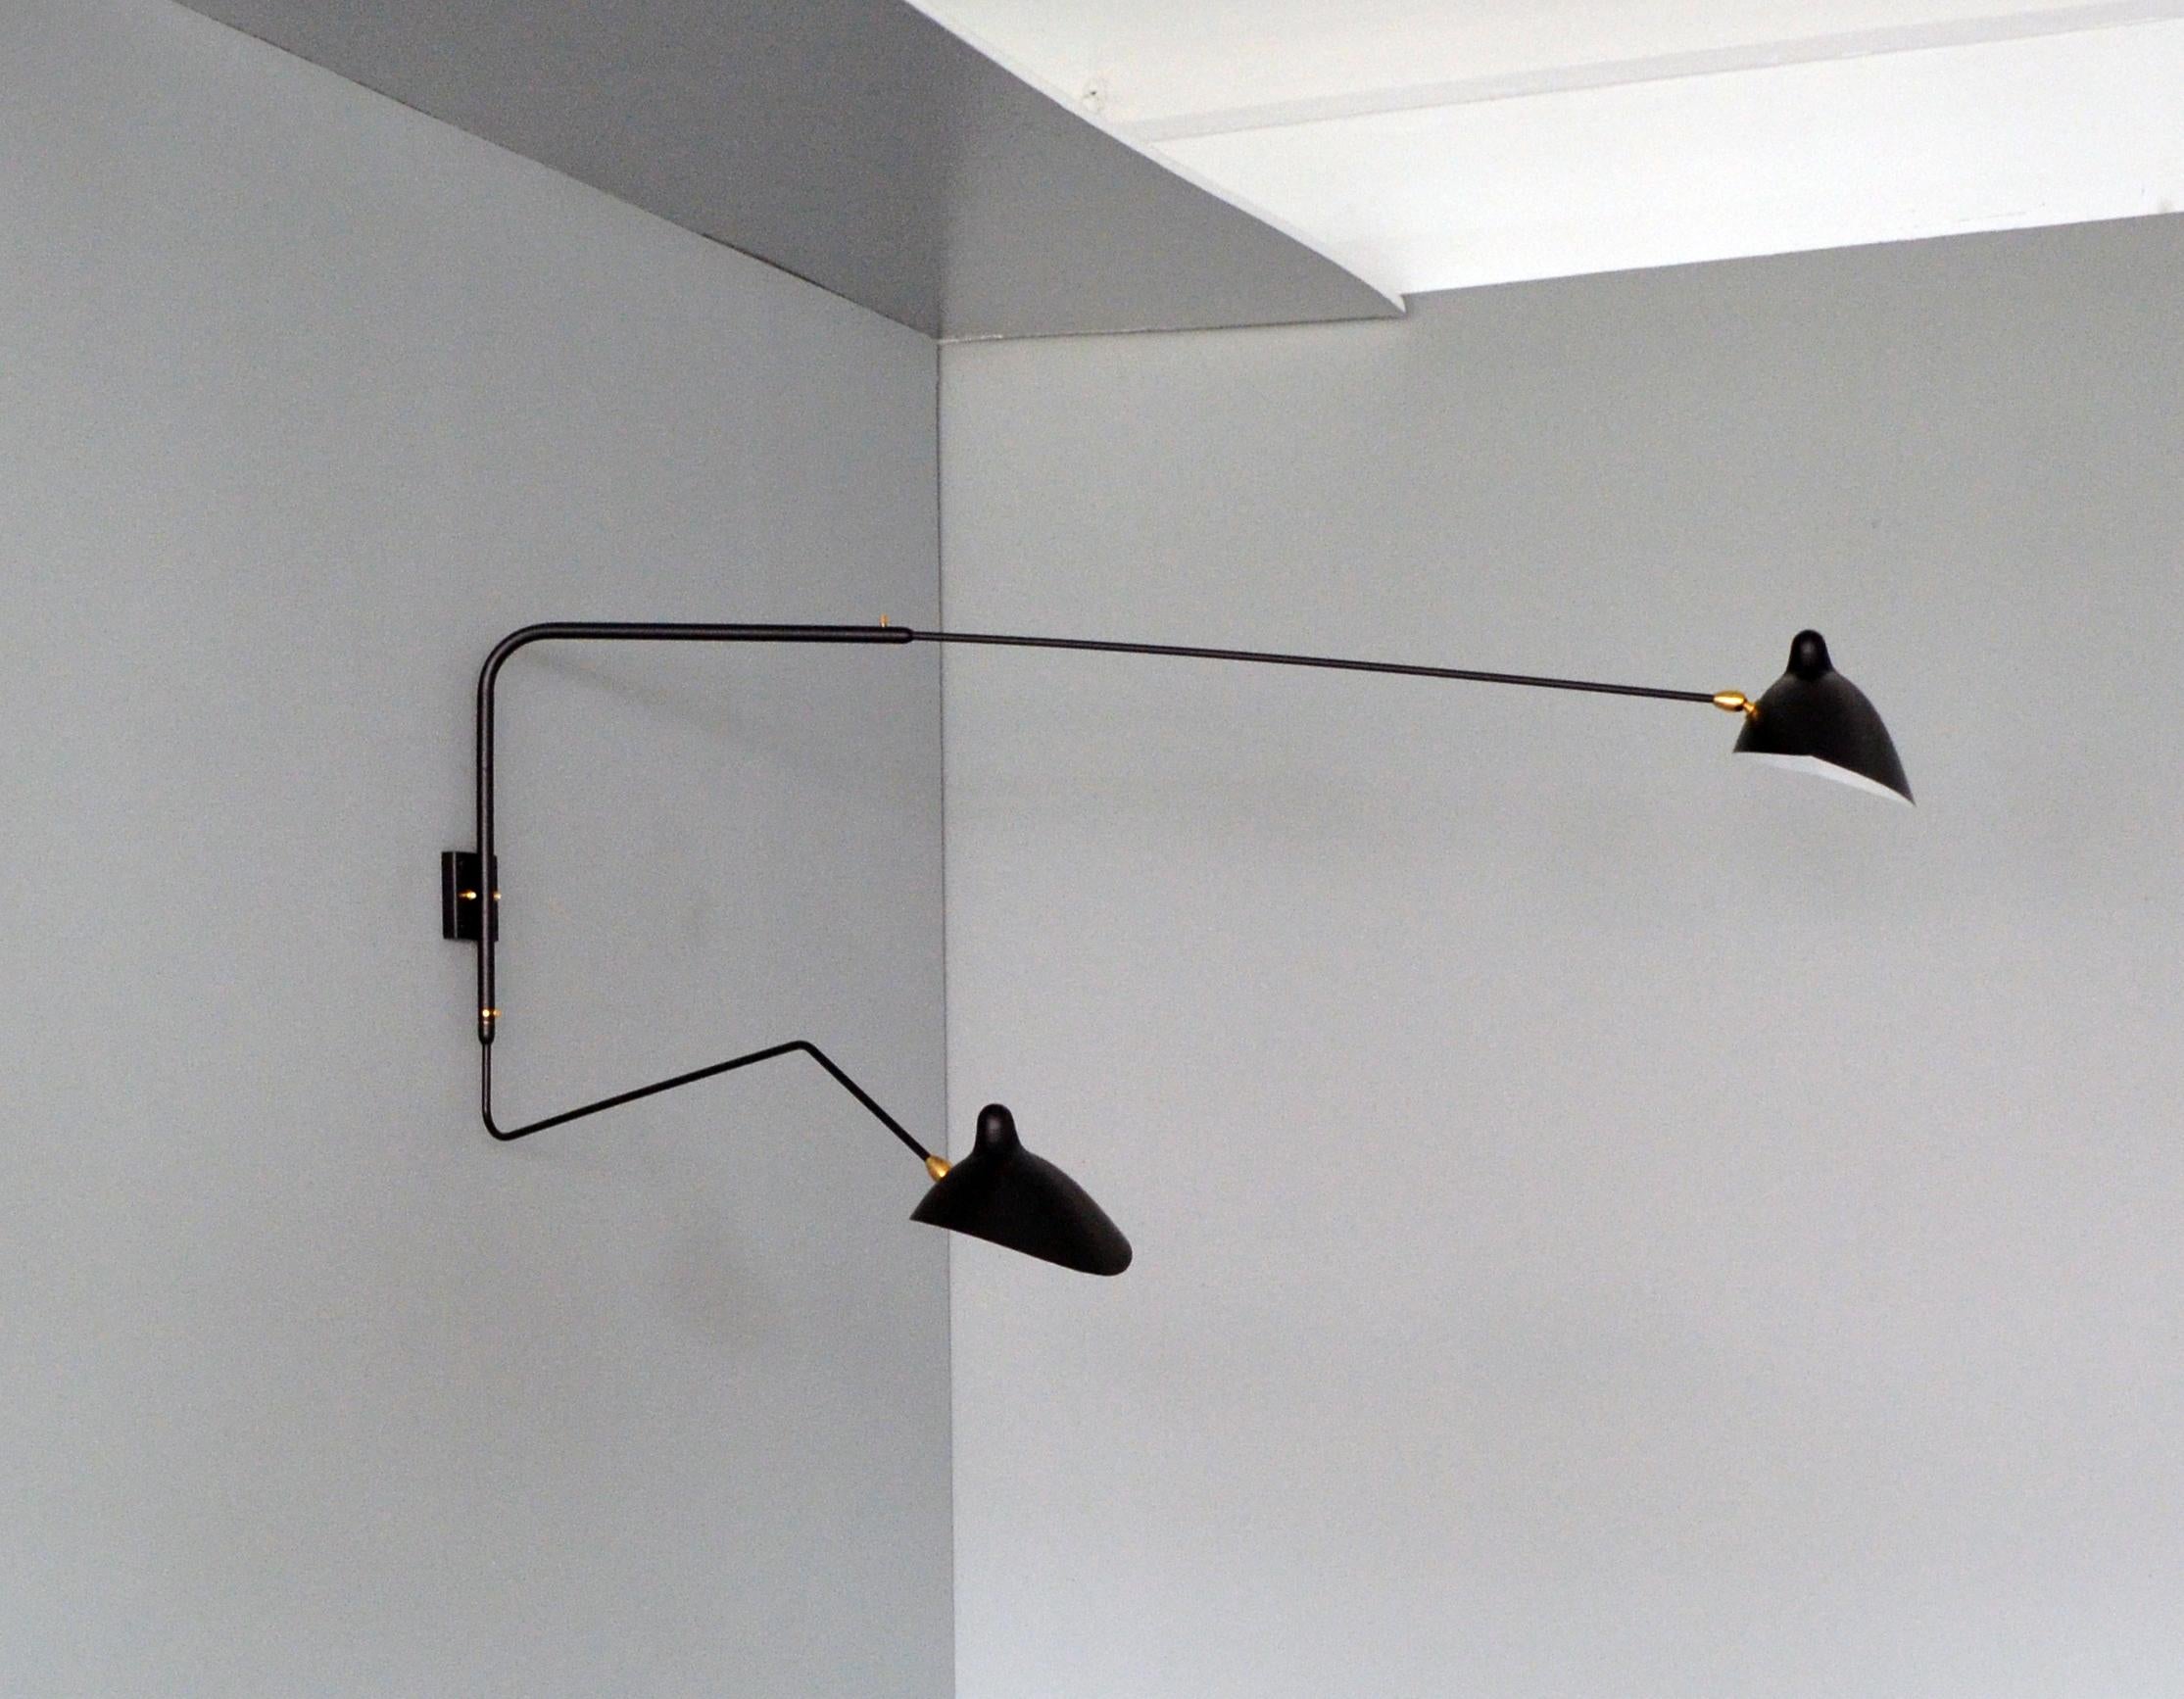 Mid-Century Modern Serge Mouille - Rotating Sconce with 2 Arms (1 Curved) in Black - IN STOCK! For Sale